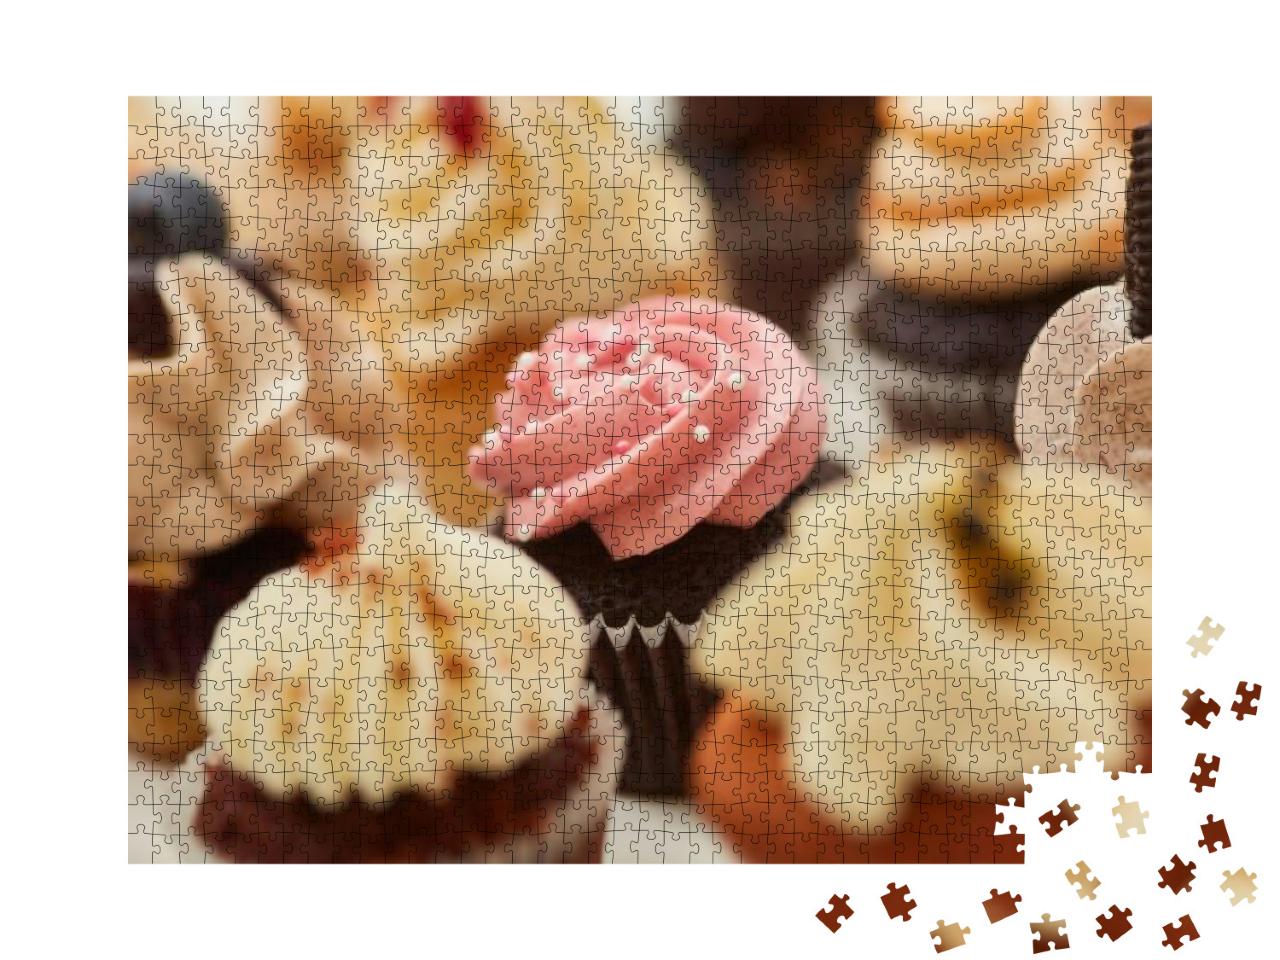 Many Different Cupcakes with Decorations & Toppings in a... Jigsaw Puzzle with 1000 pieces